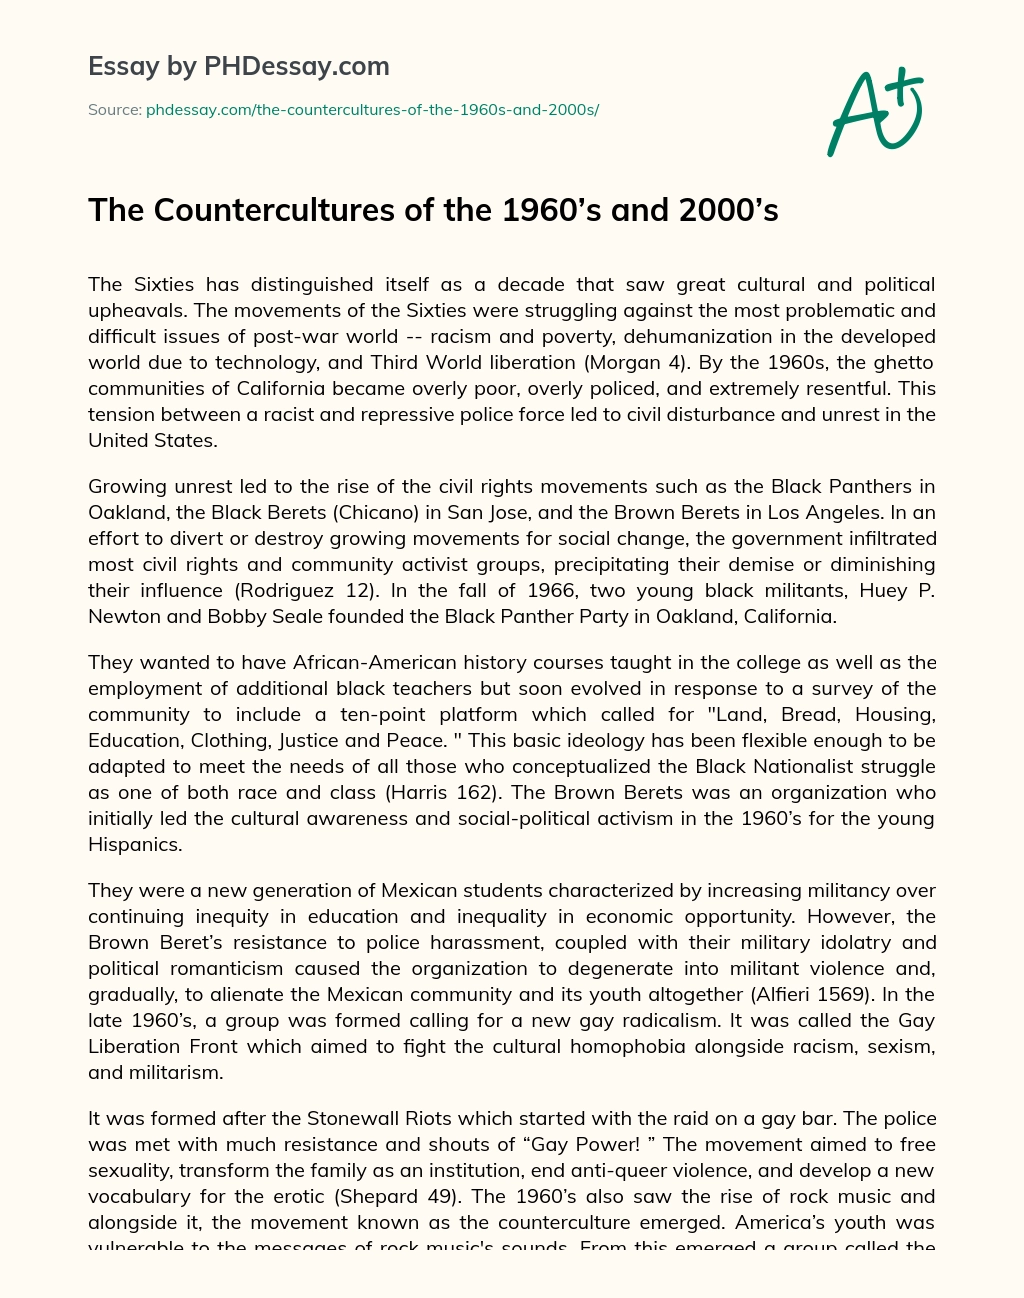 The Countercultures of the 1960’s and 2000’s essay